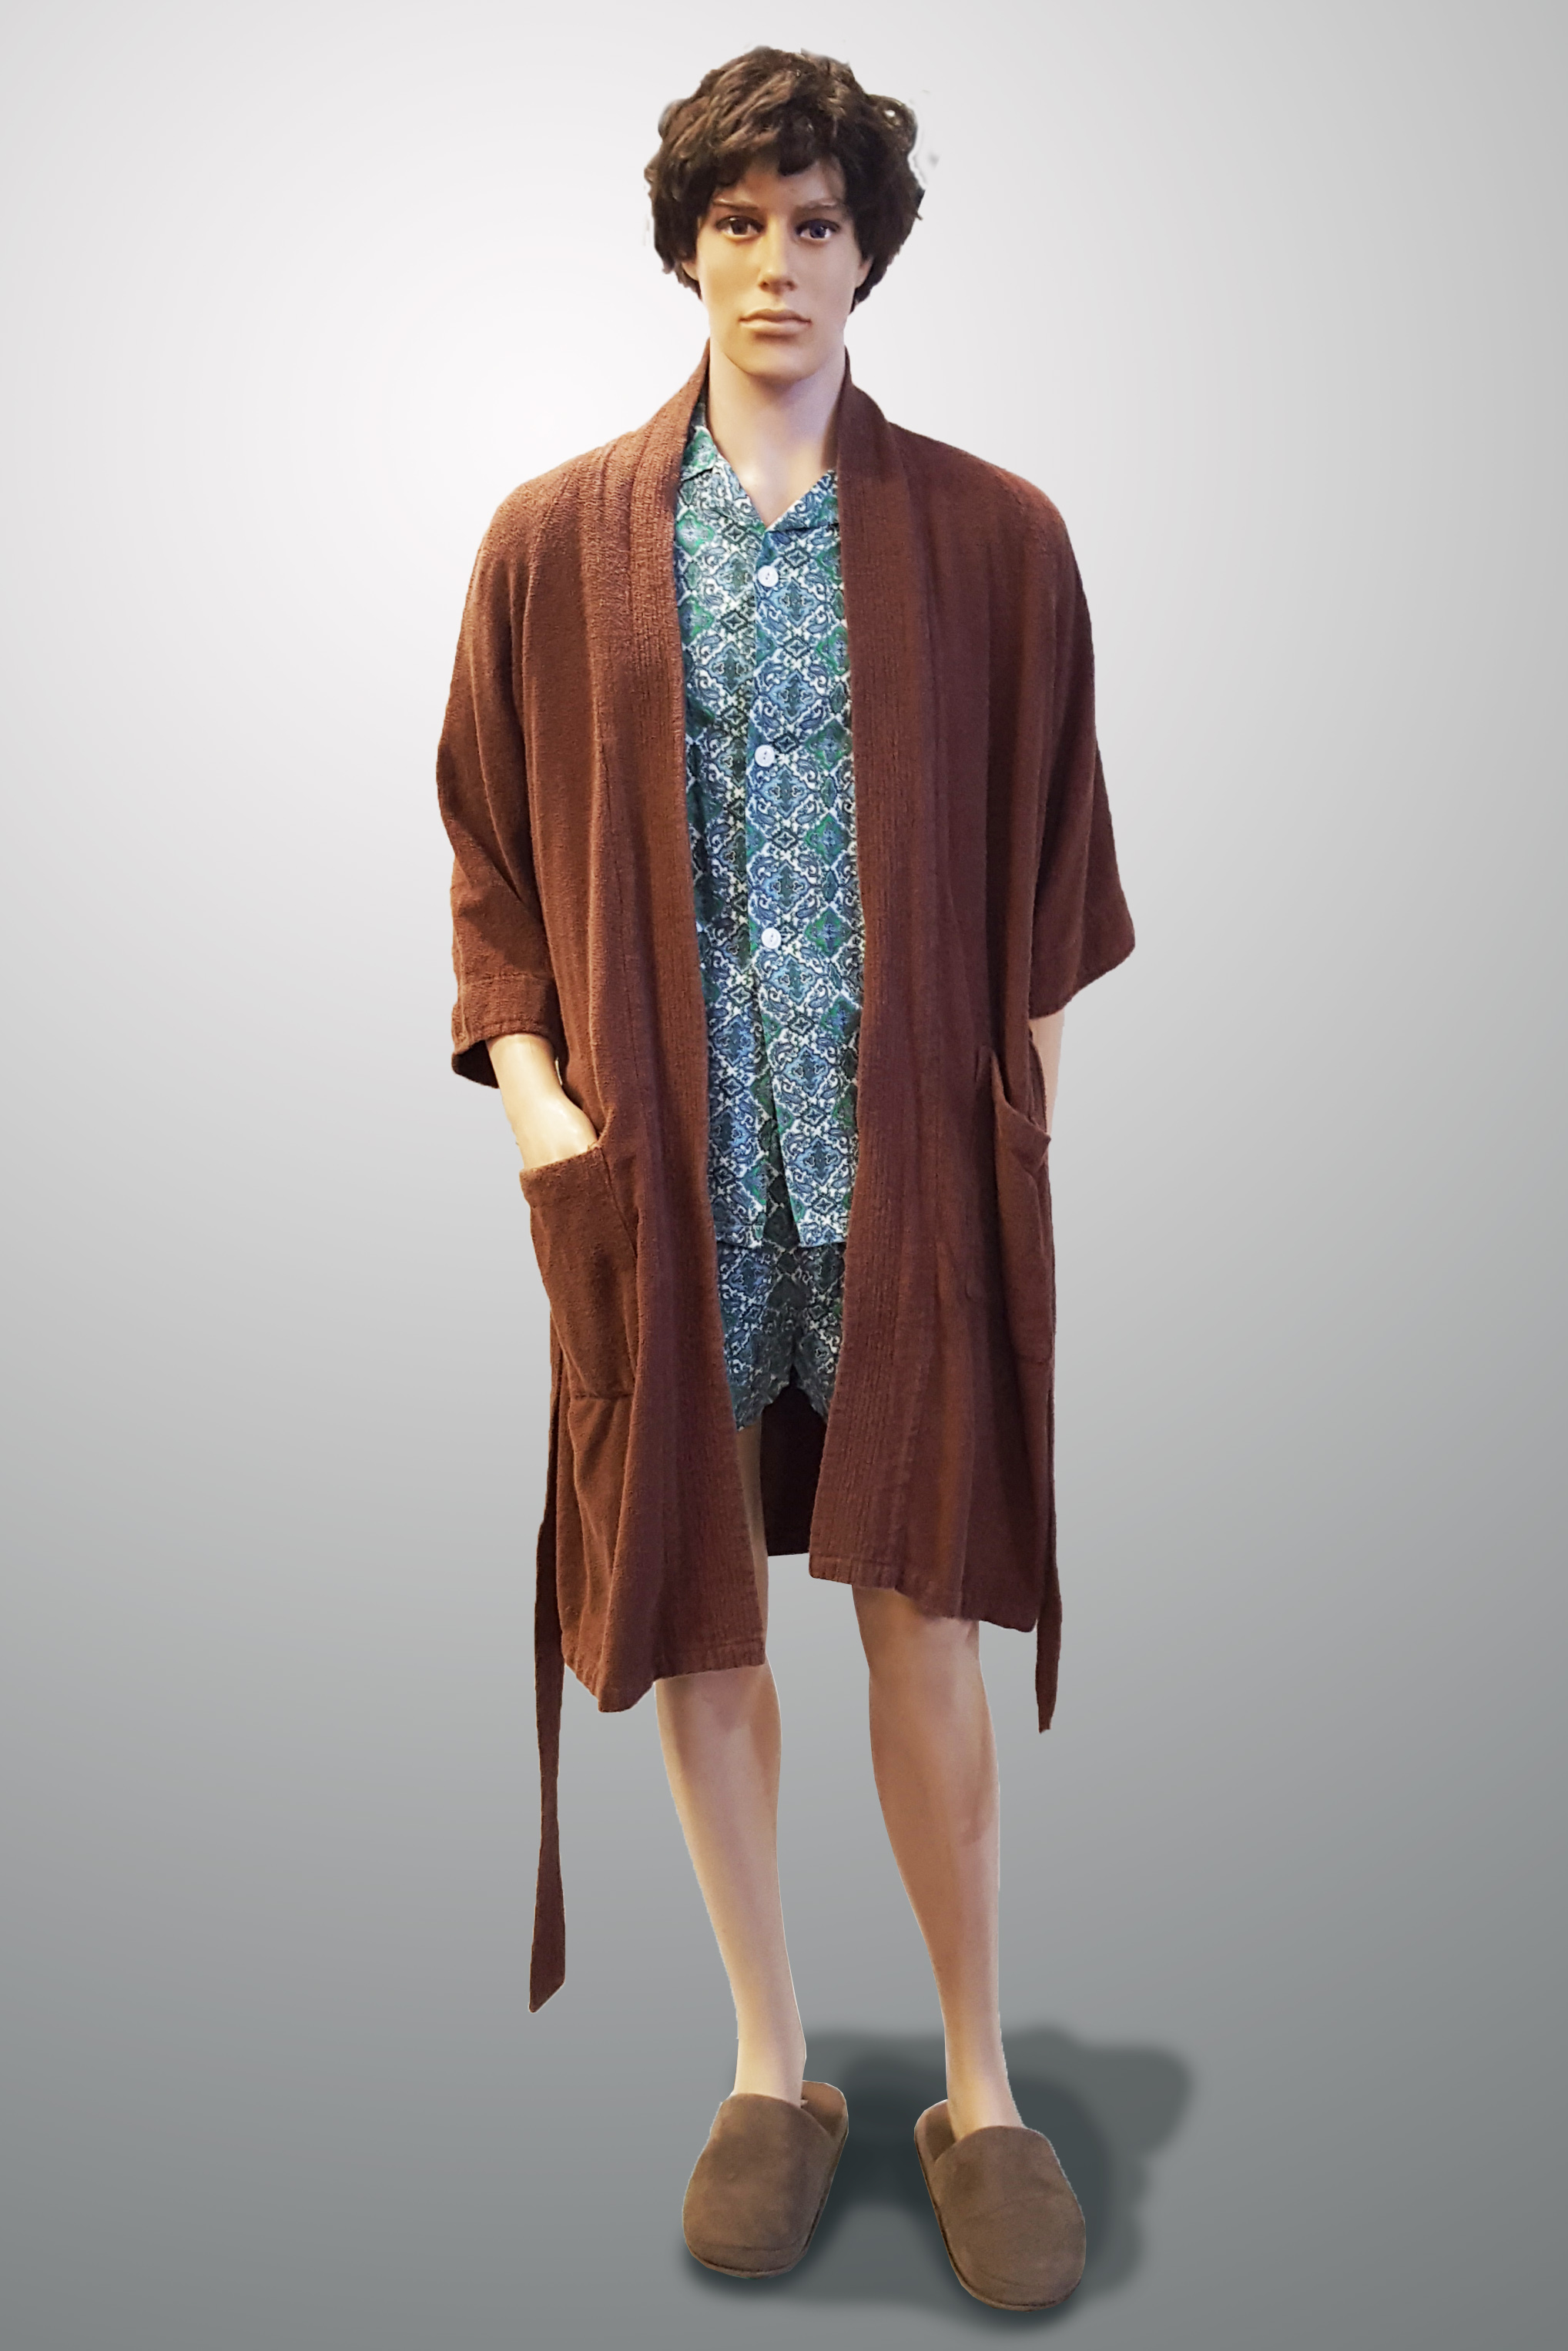 Shorty Pajamas with Brown Toweling Dressing Gown